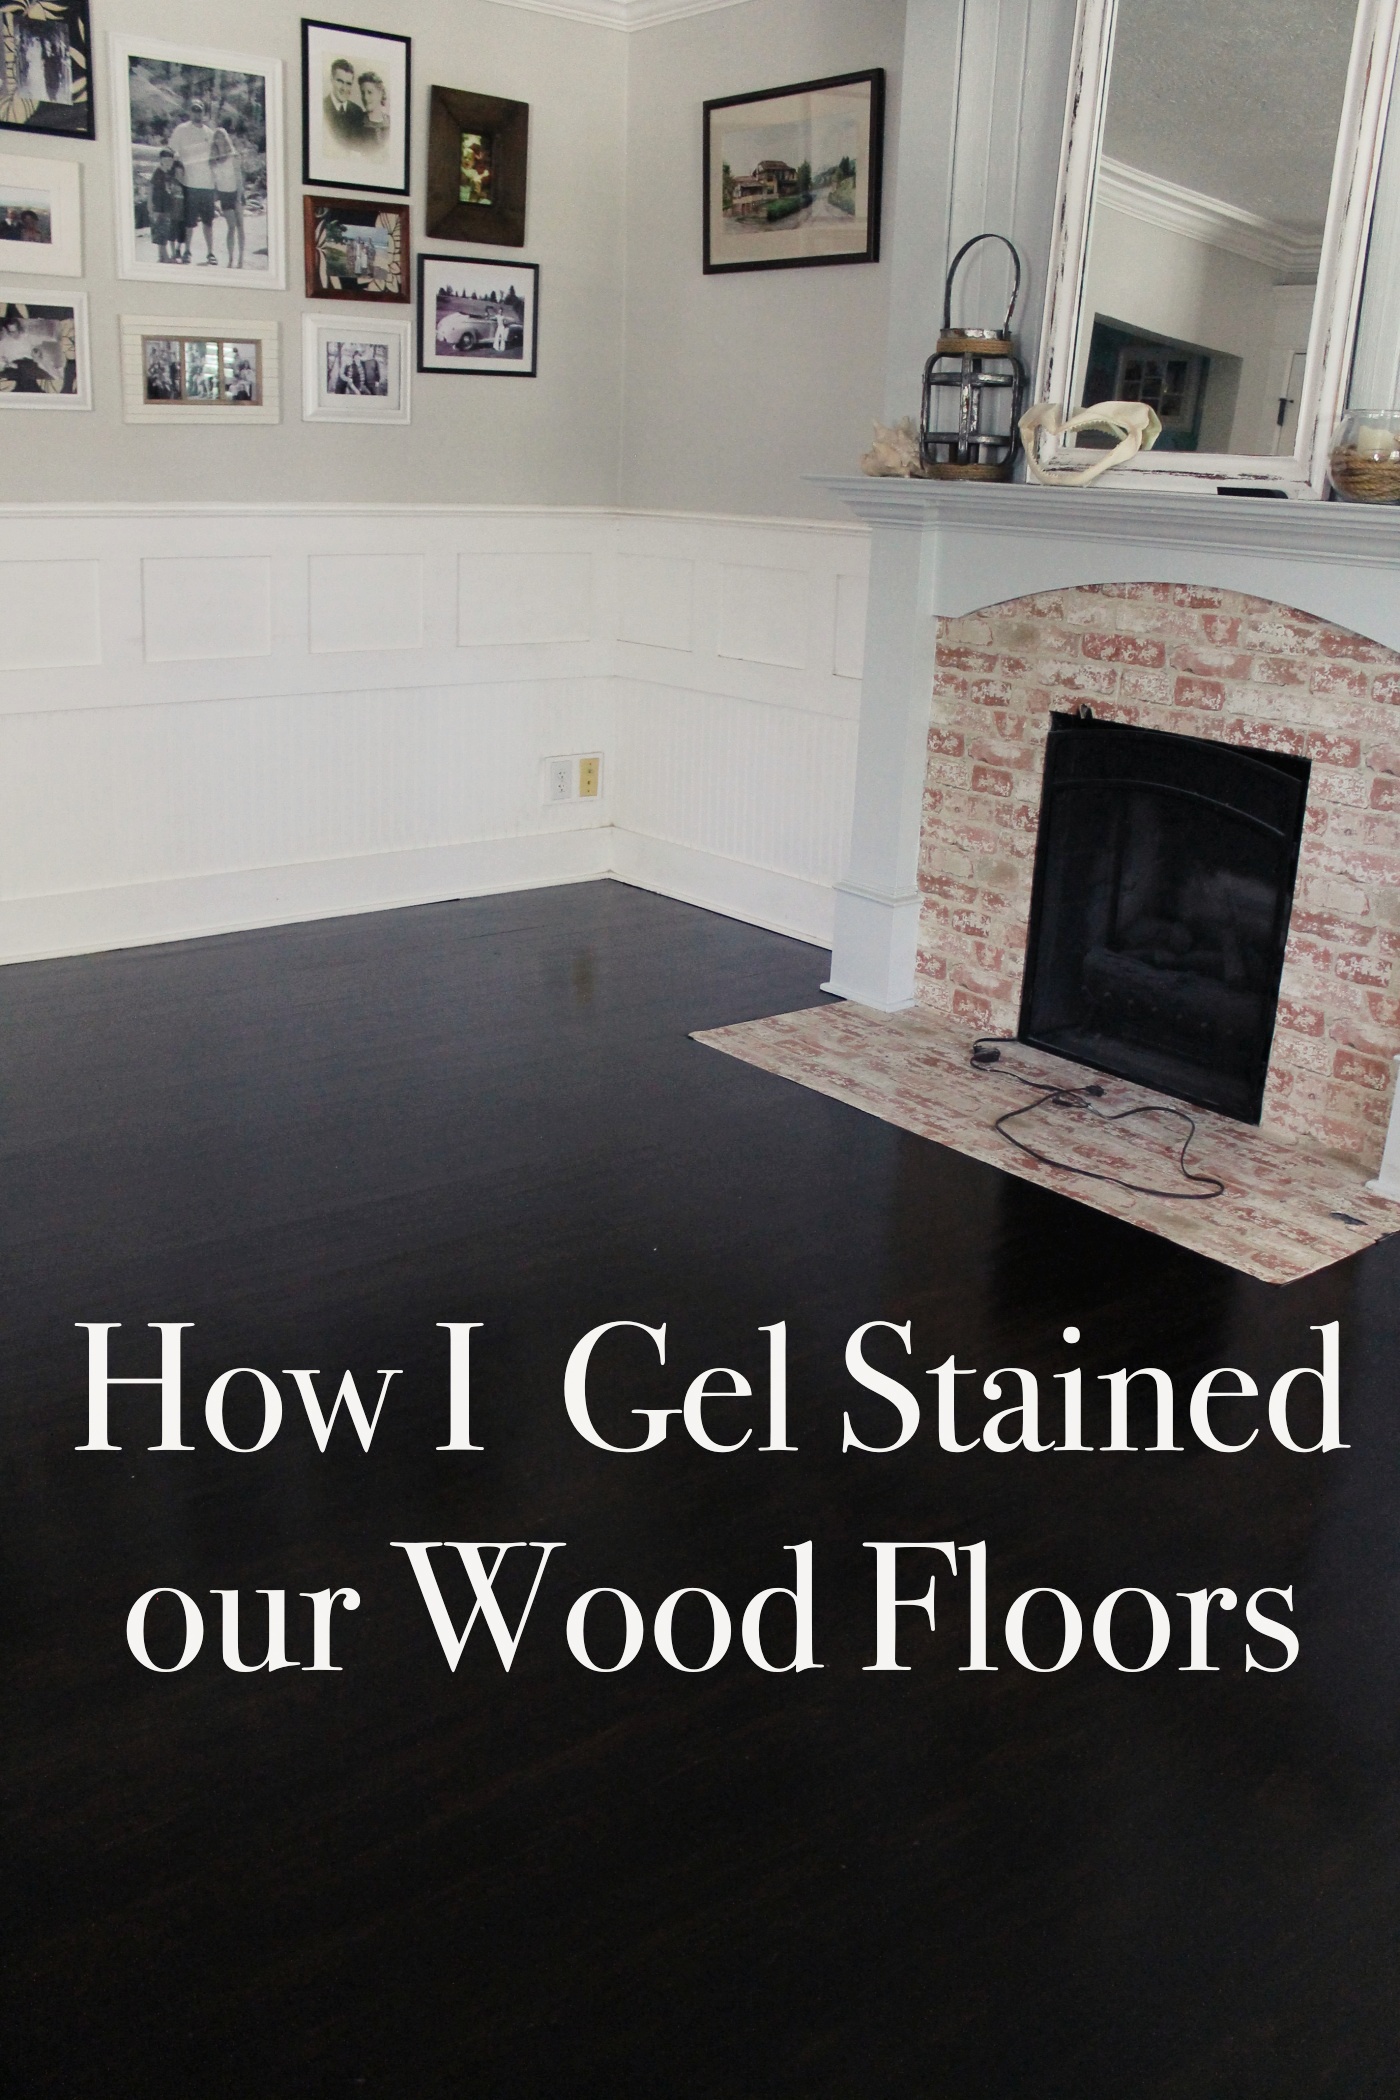 How I Gel Stained our Wood Floors